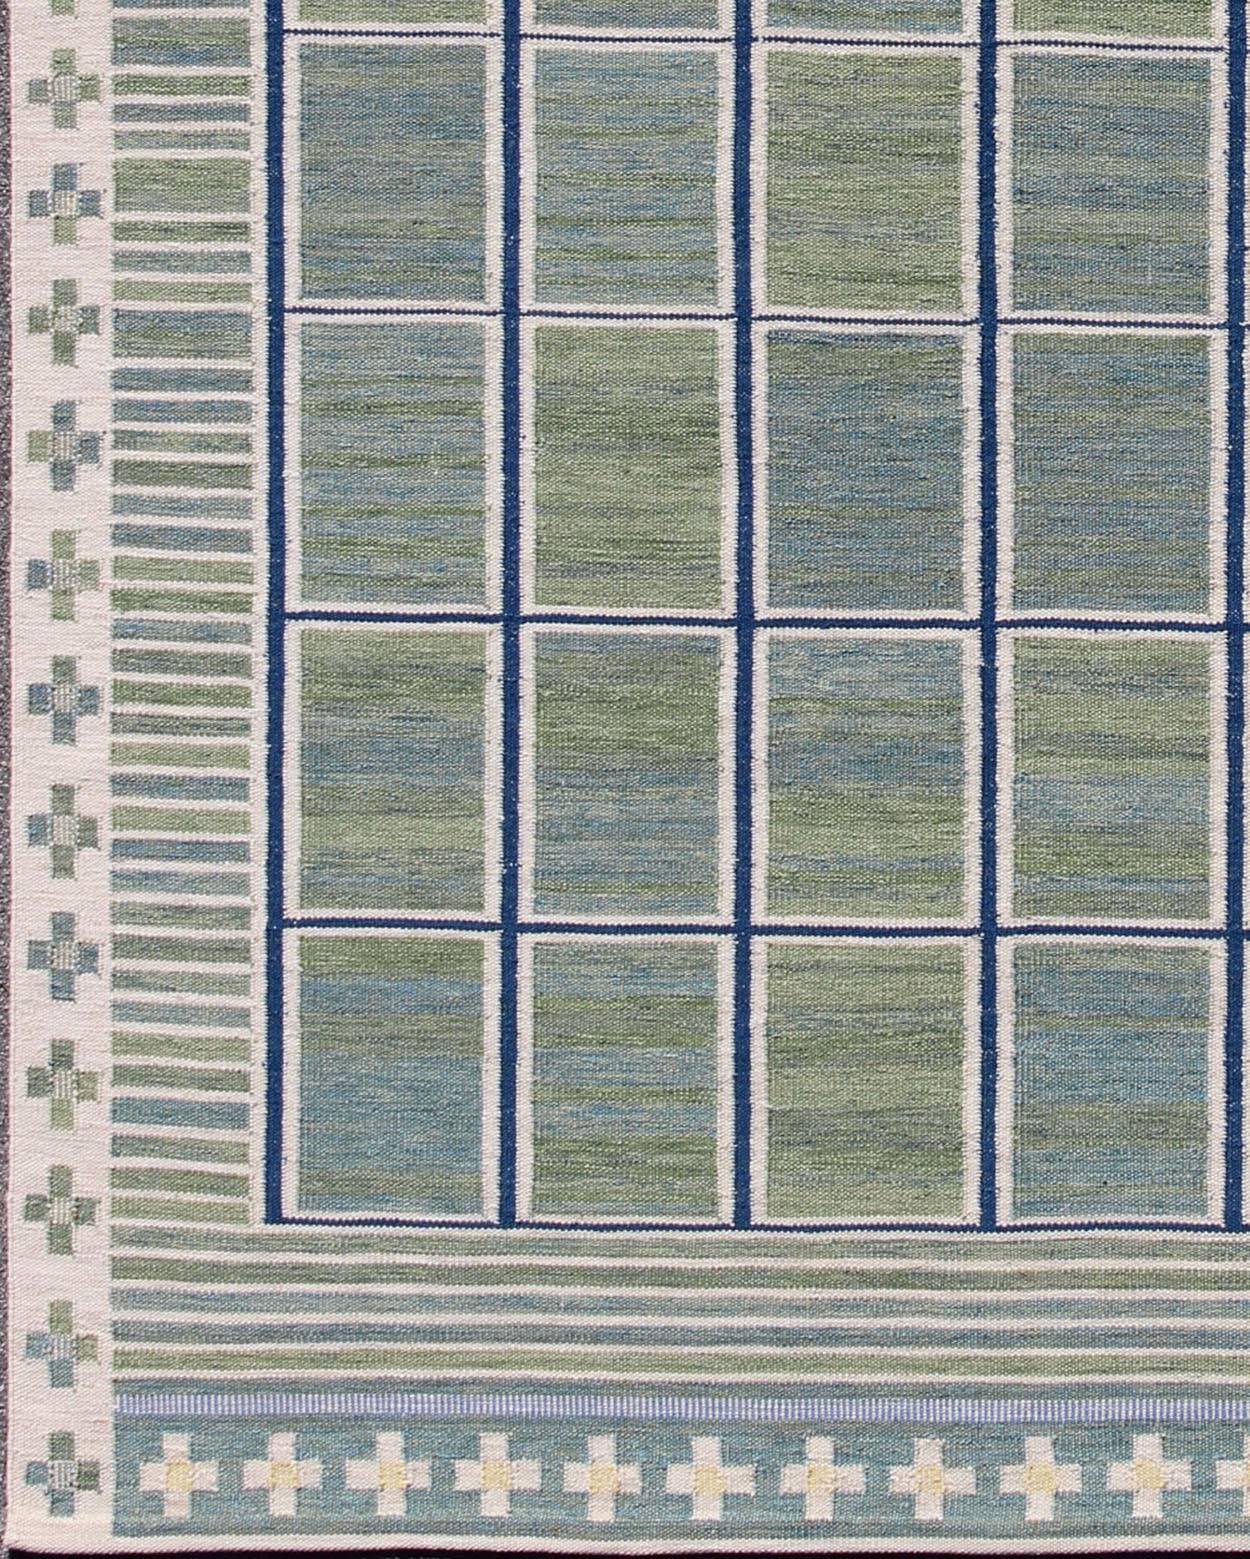 This Scandinavian flat-weave is inspired by the work of Swedish textile designers of the early to mid-20th century. With a unique blend of historical and modern design, this dynamic and exciting composition is beautifully suited for both